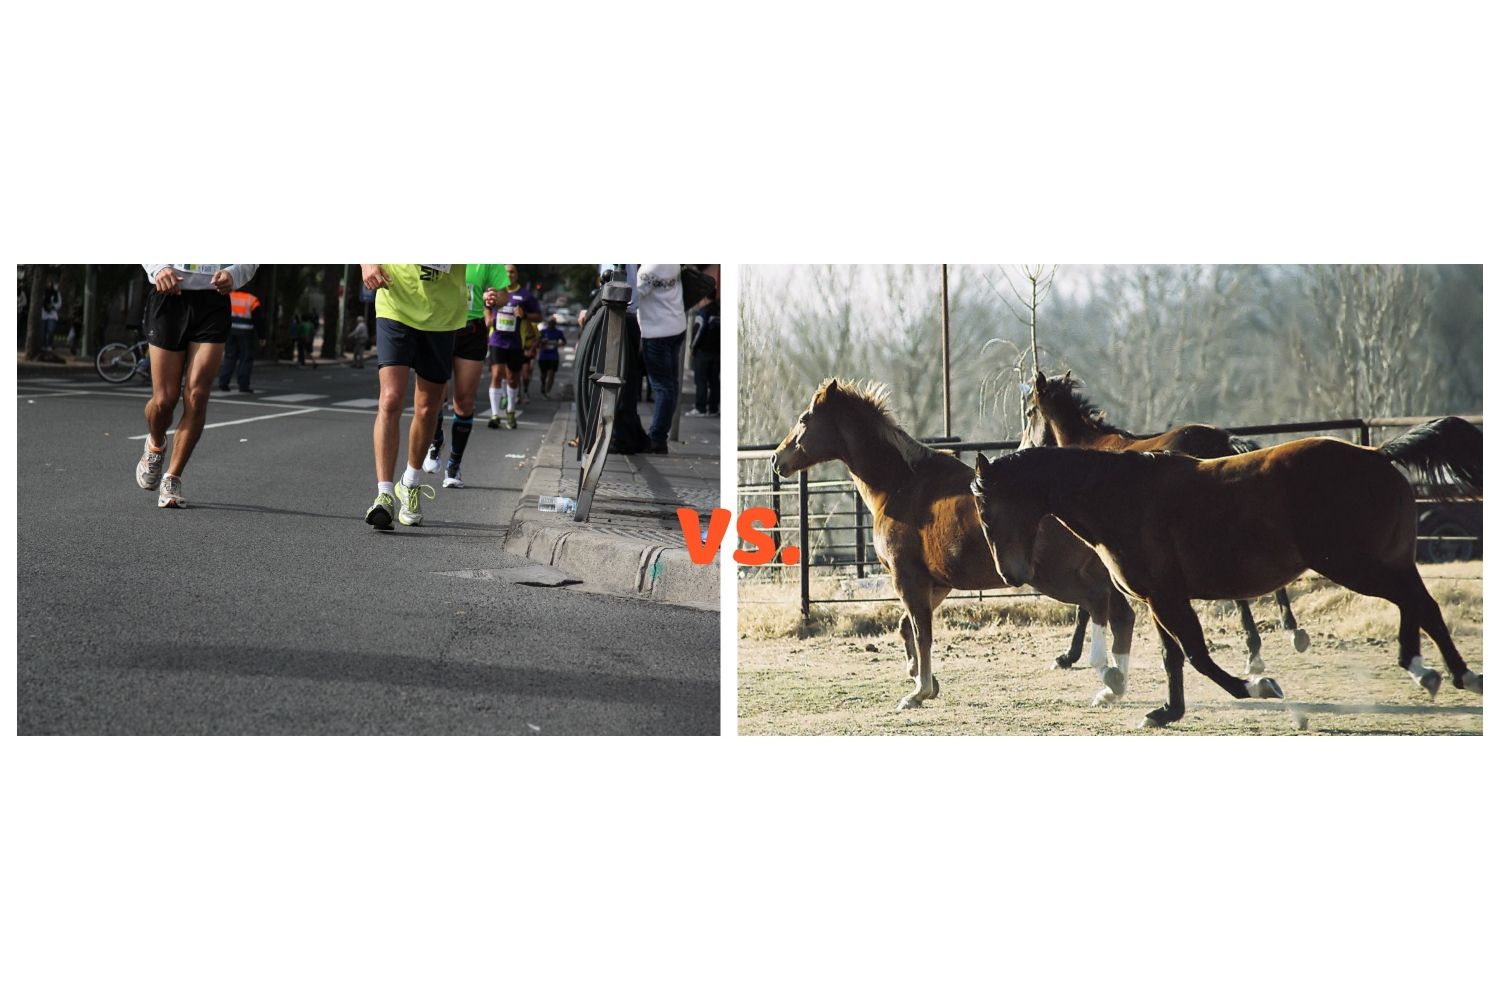 Who Runs Faster, a Person or a Horse?